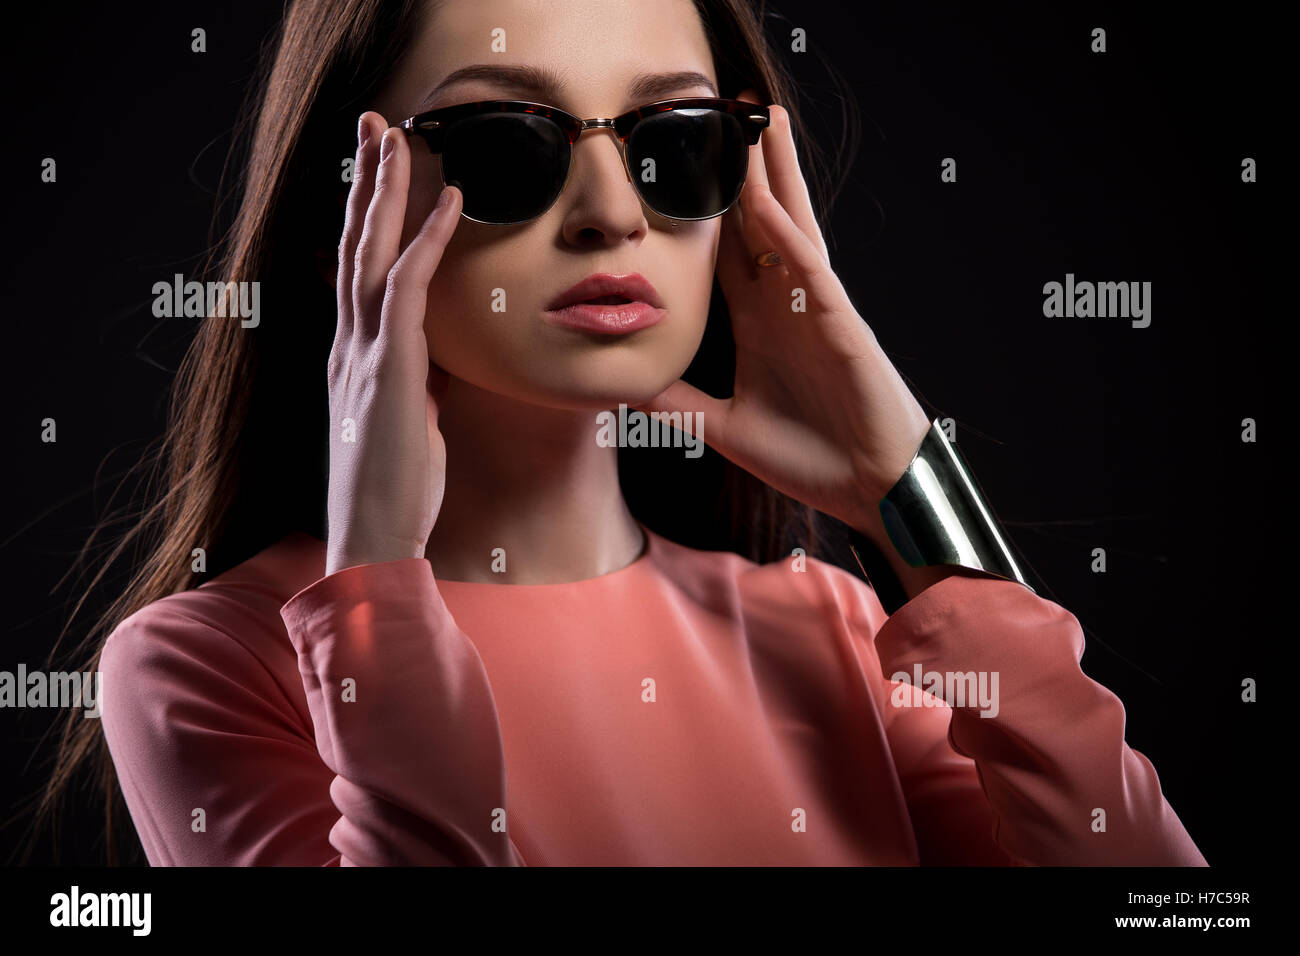 Beautiful young woman in sunglasses looking at camera Stock Photo